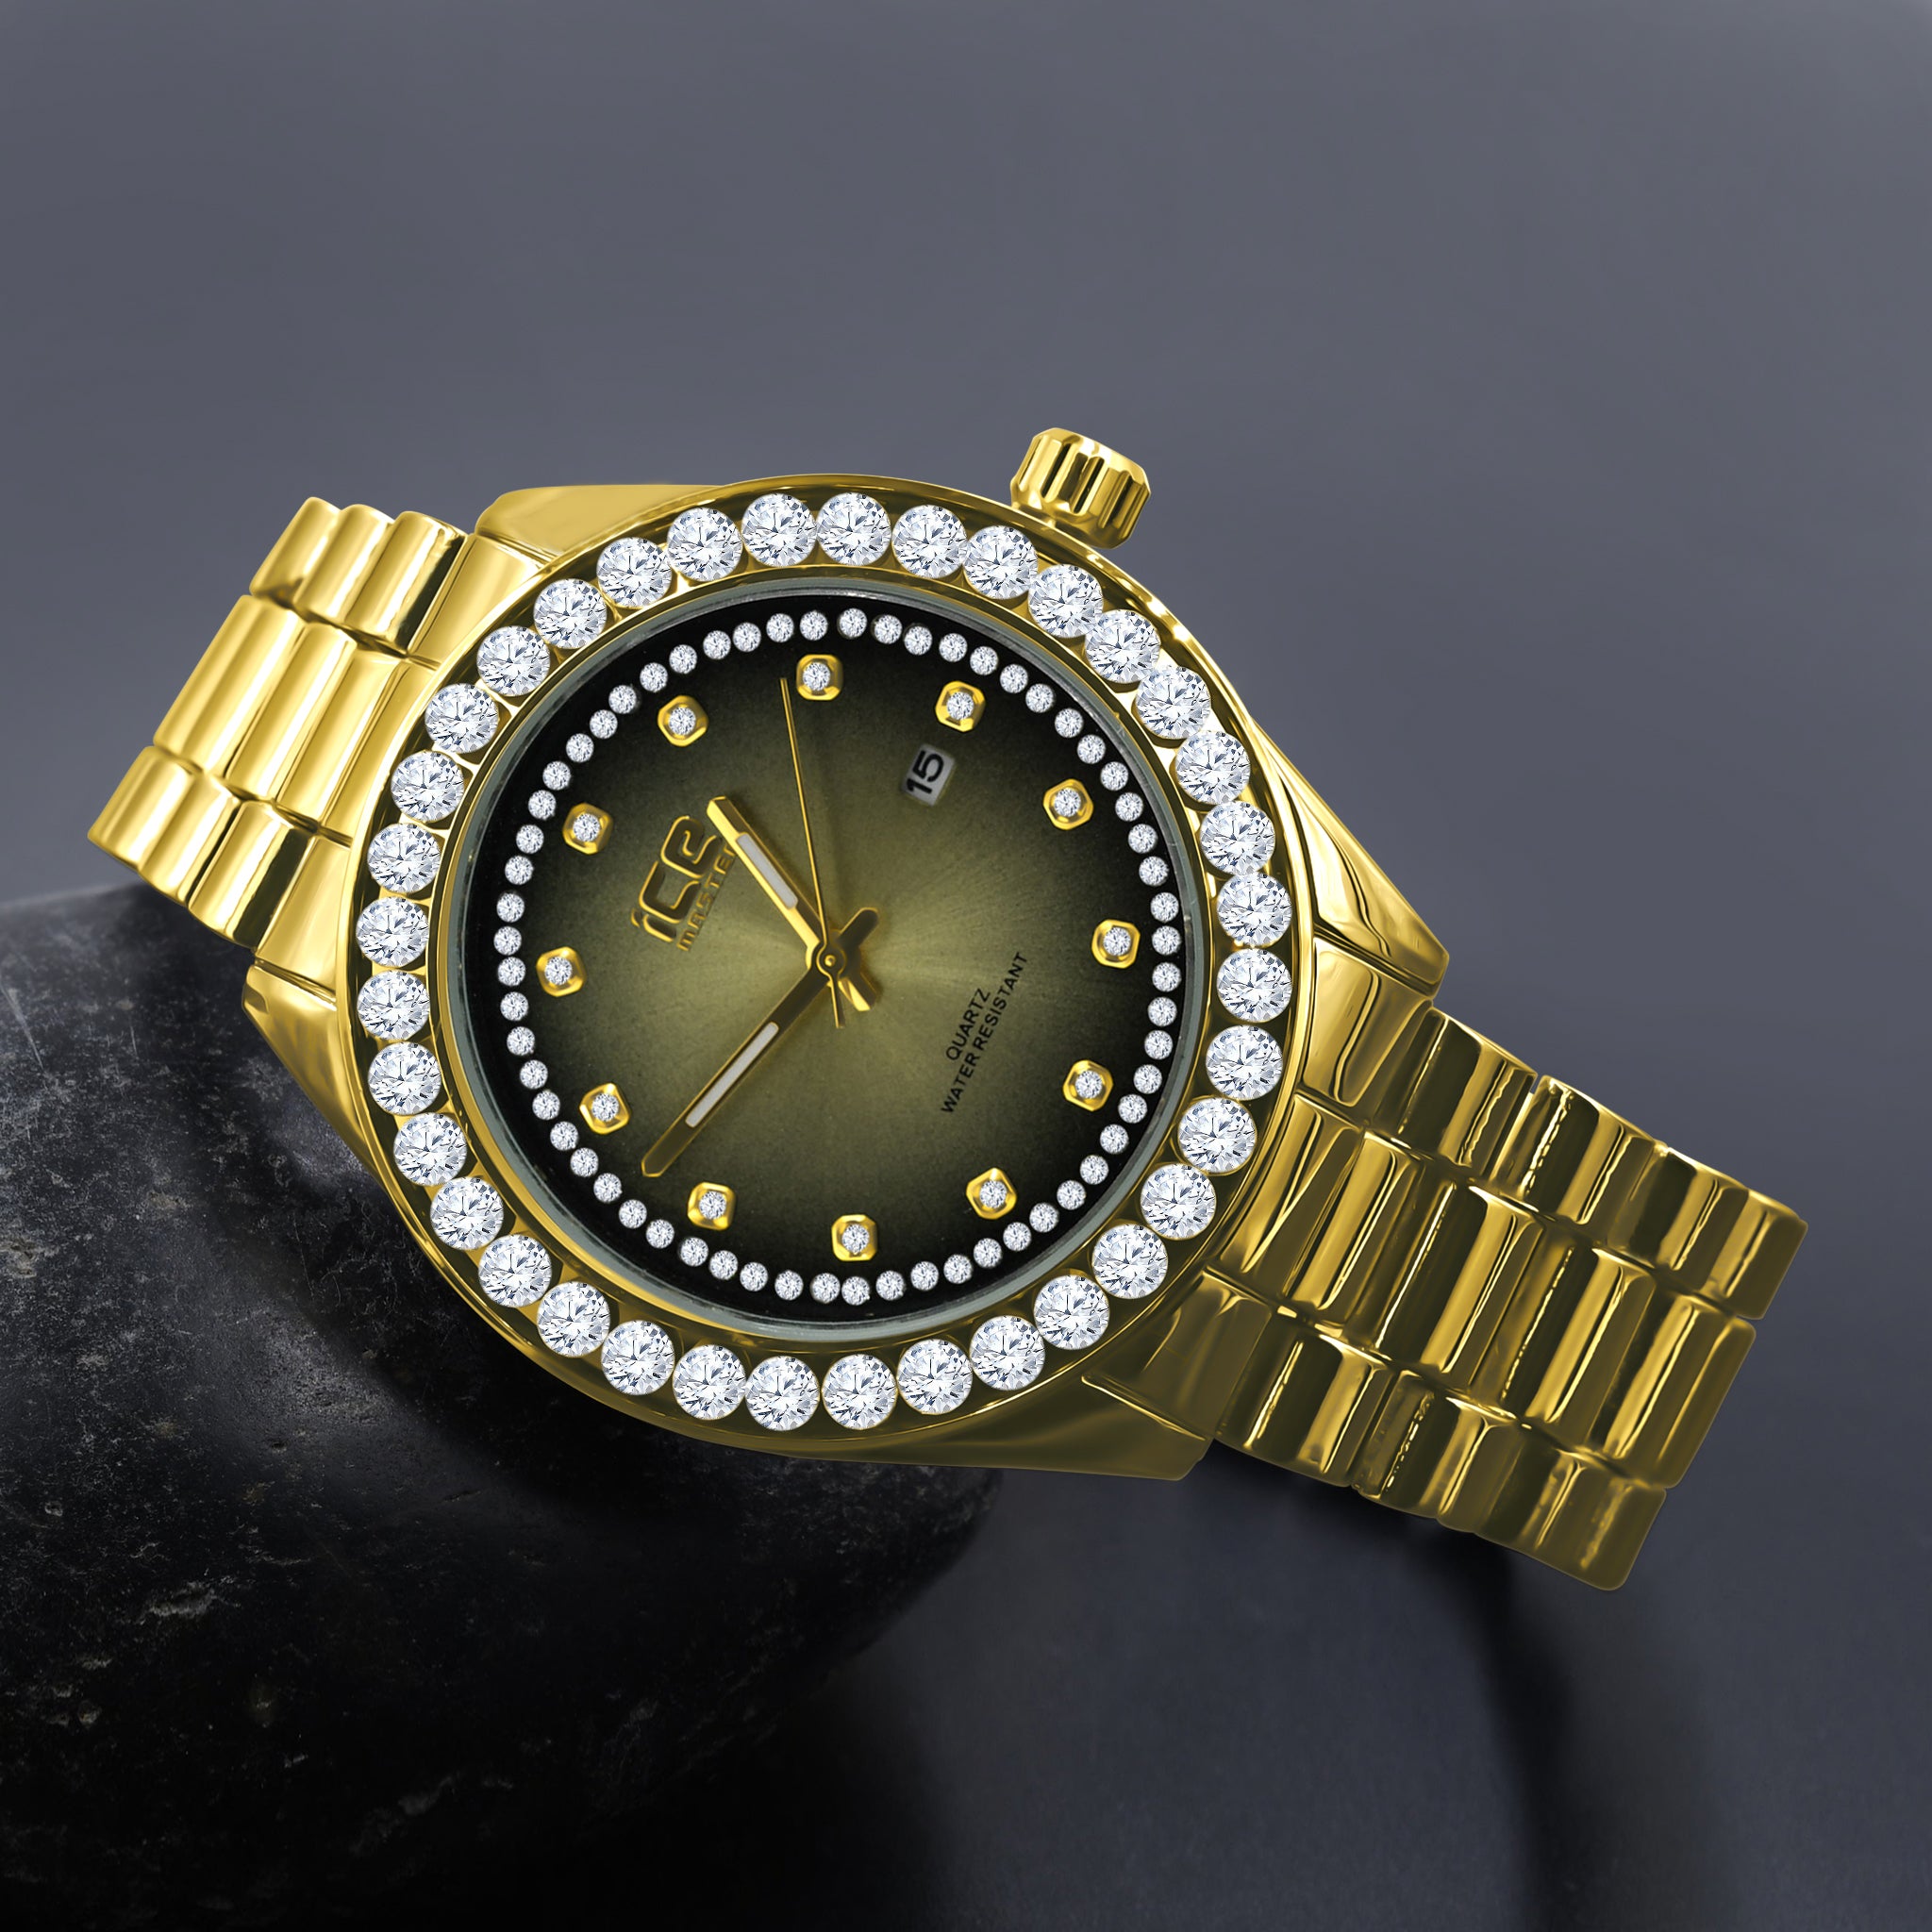 DYNASTY - GMT: XXIV - Time Pieces Watches at TCF | DYNASTY p… | Flickr